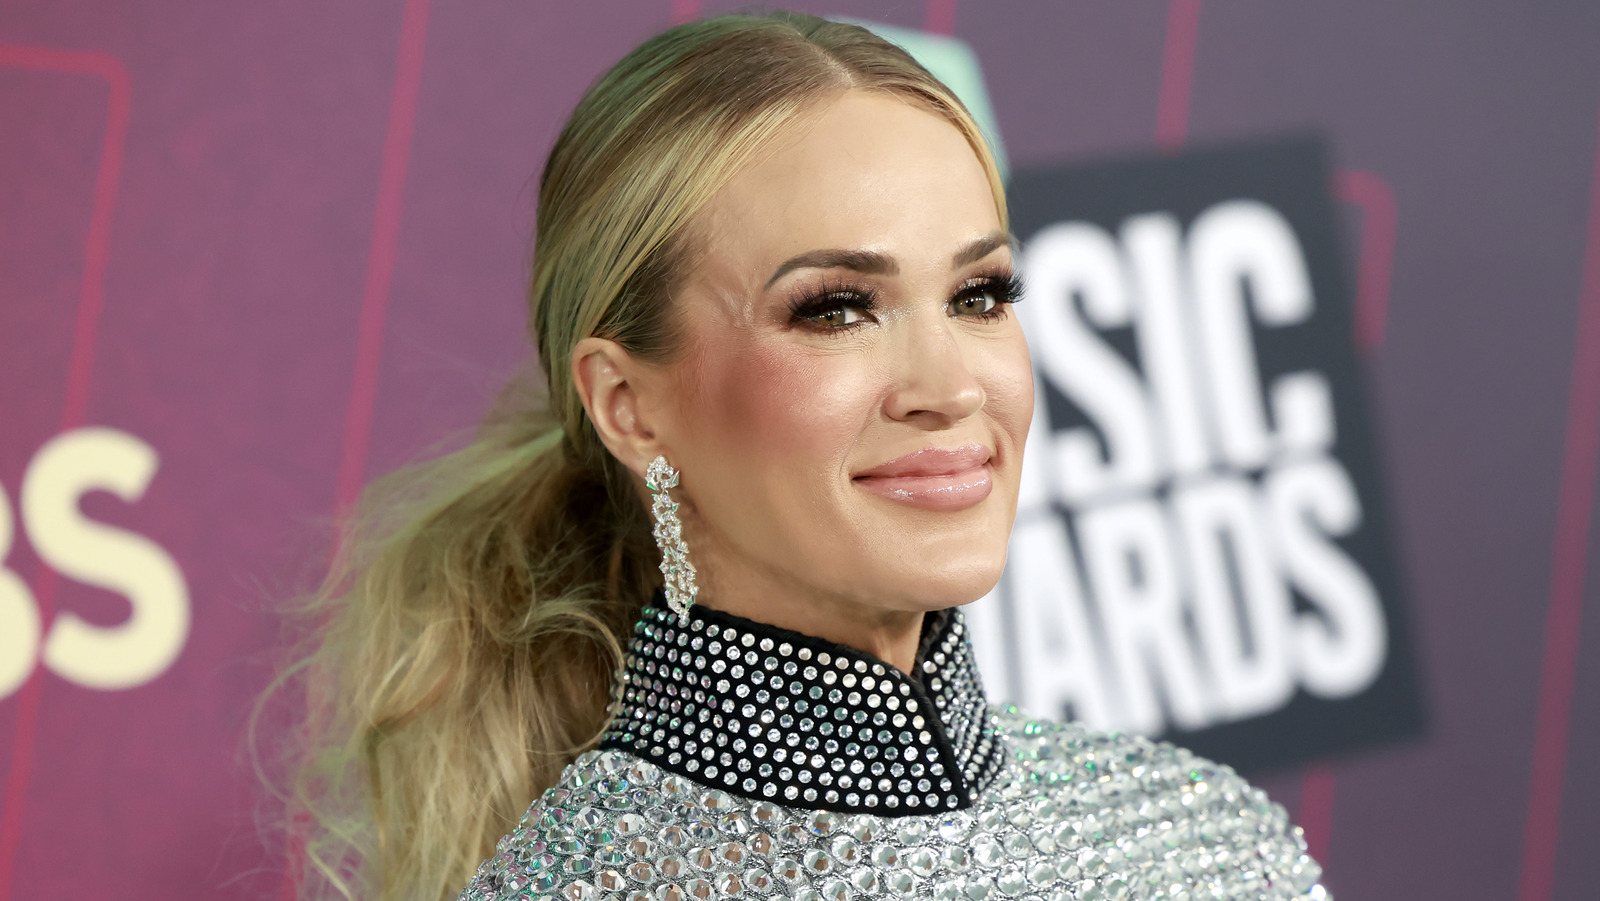 Carrie Underwood's 2023 CMT Awards Look Gives Her The Biggest Leg Up On The  Competition (Literally)